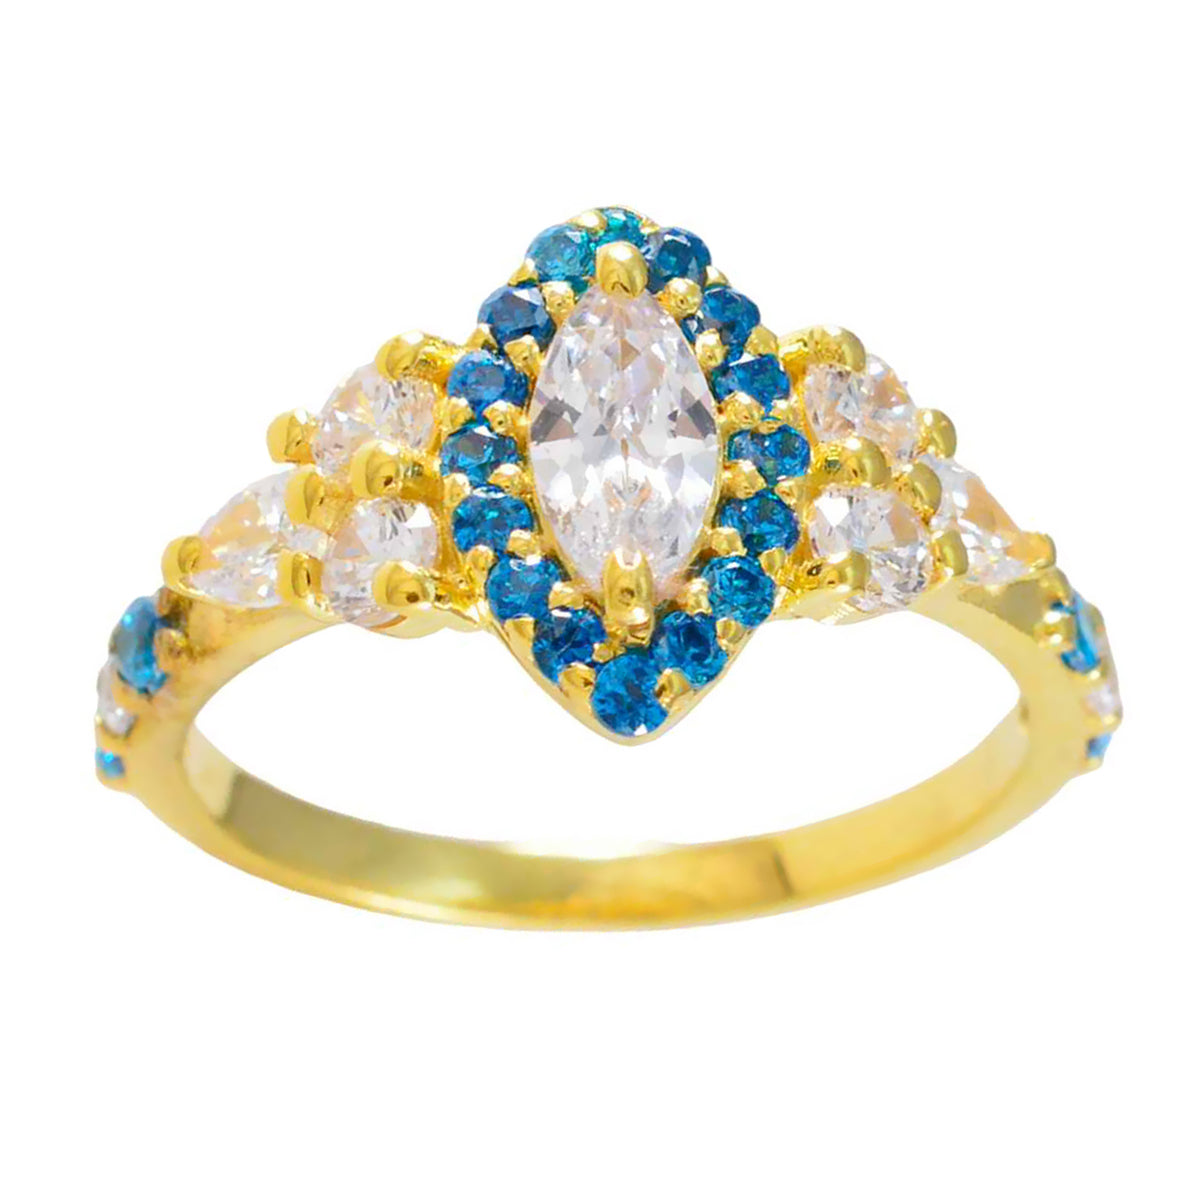 Riyo Attractive Silver Ring With Yellow Gold Plating Blue Topaz CZ Stone Marquise Shape Prong Setting Bridal Jewelry Anniversary Ring